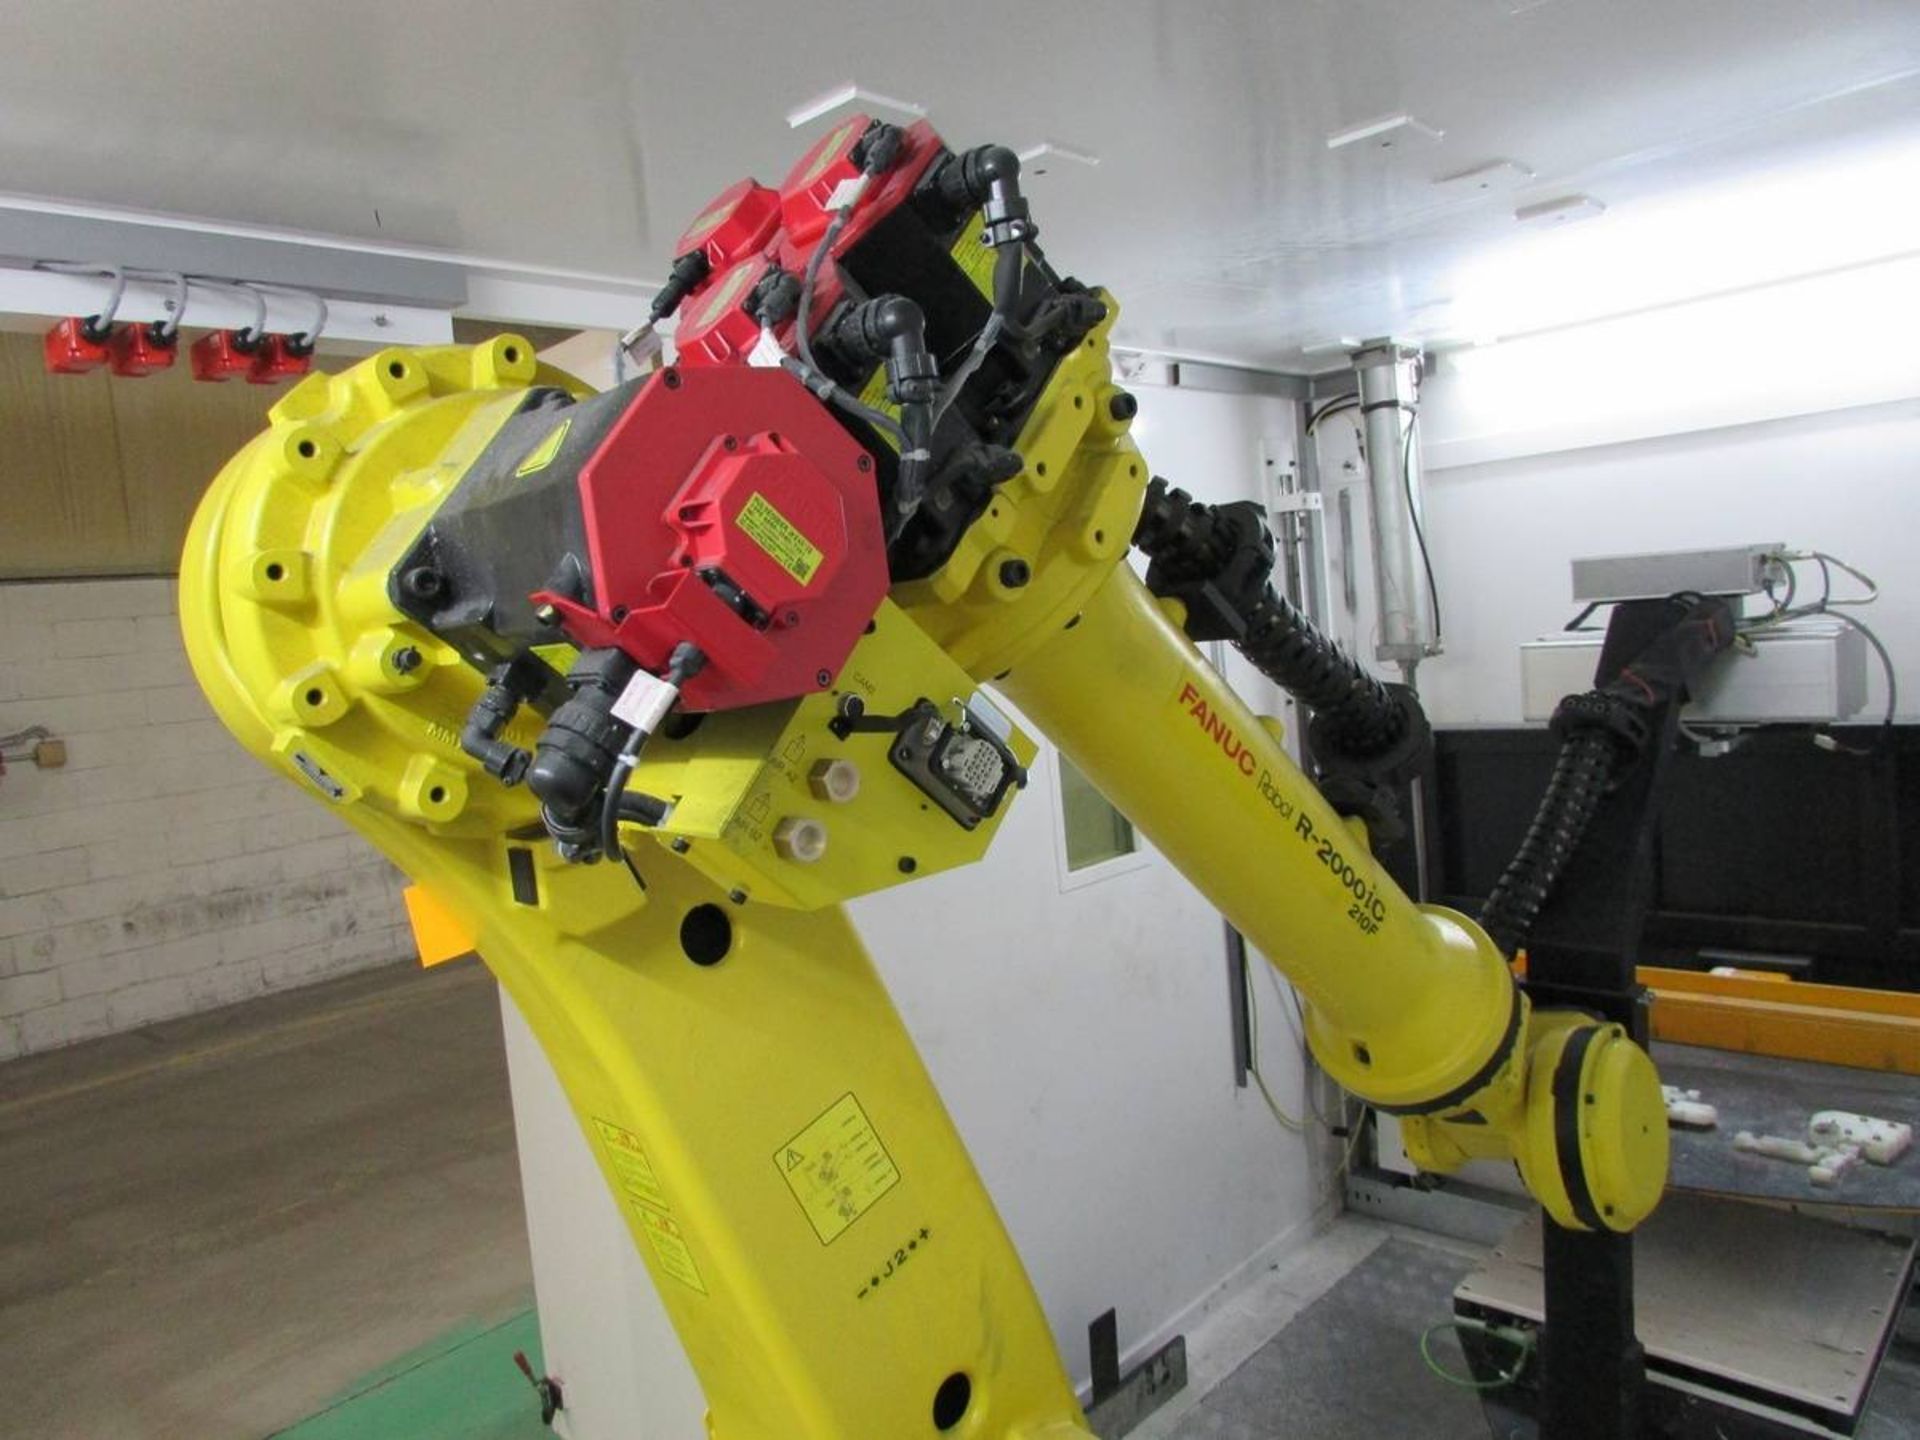 2017 Fanuc 2000 iC 210L 6 Axis Material Handling Robot - Image 4 of 9